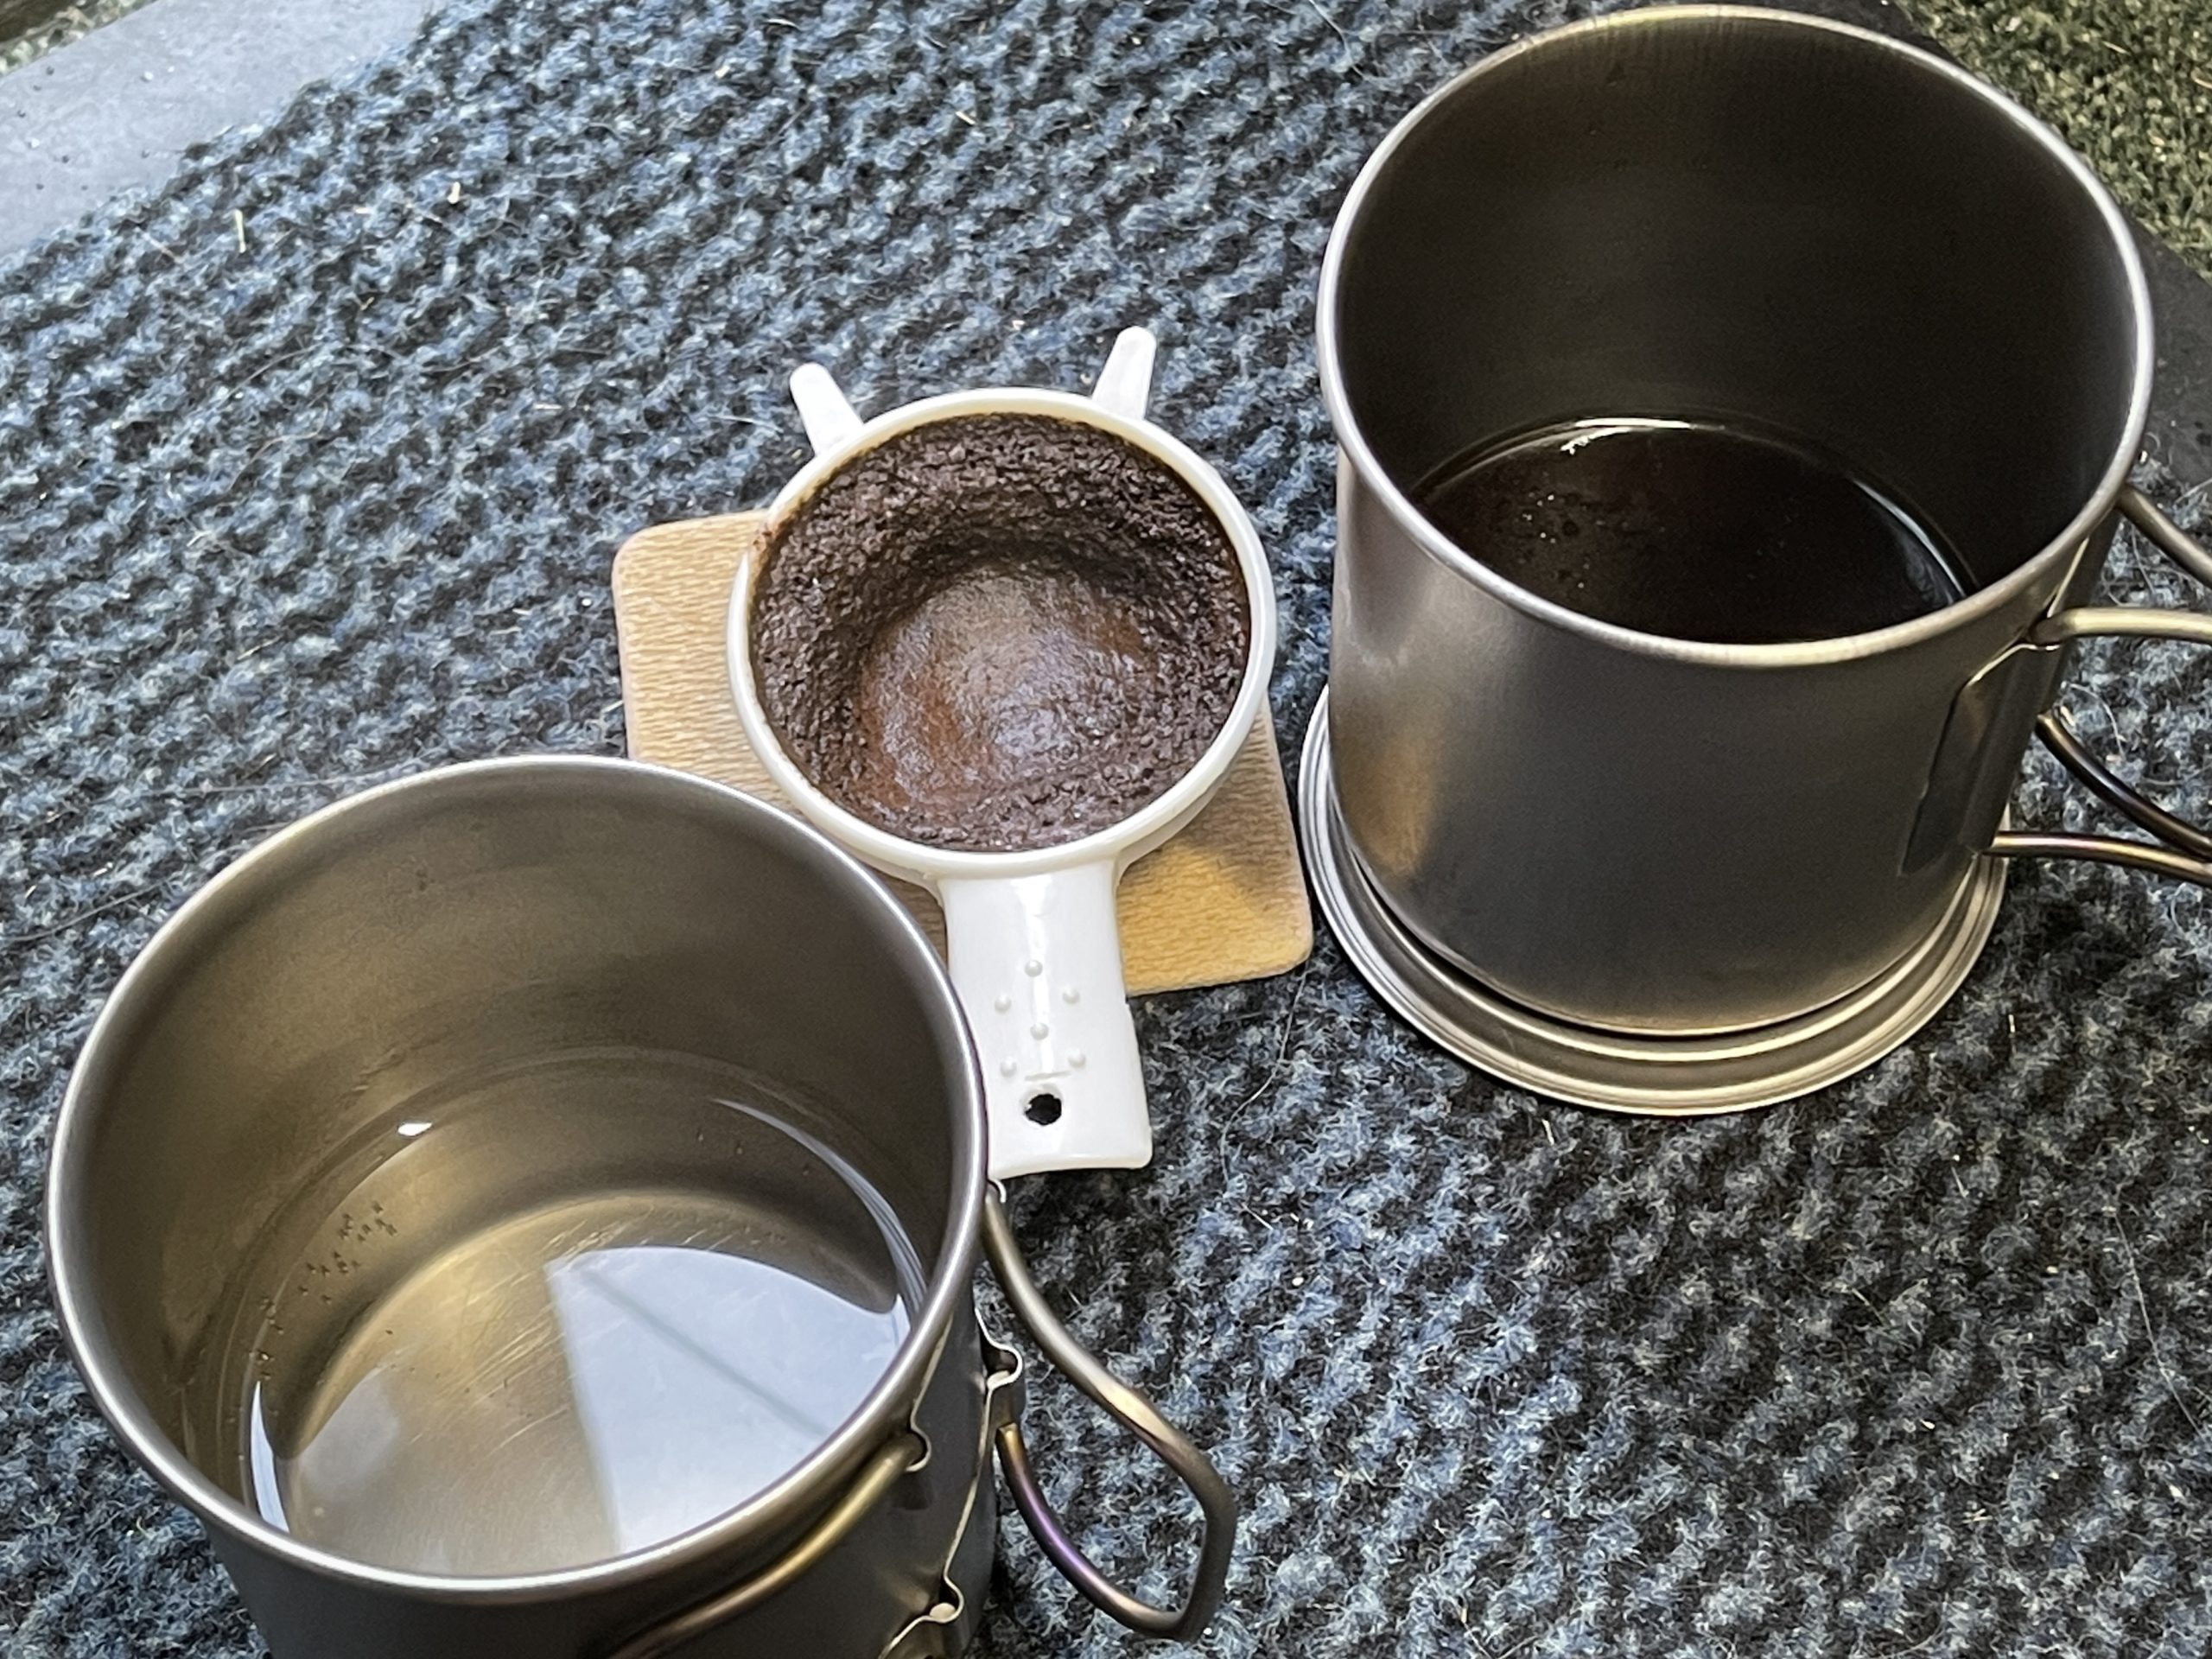 Ground coffee when lightweight backpacking or camping